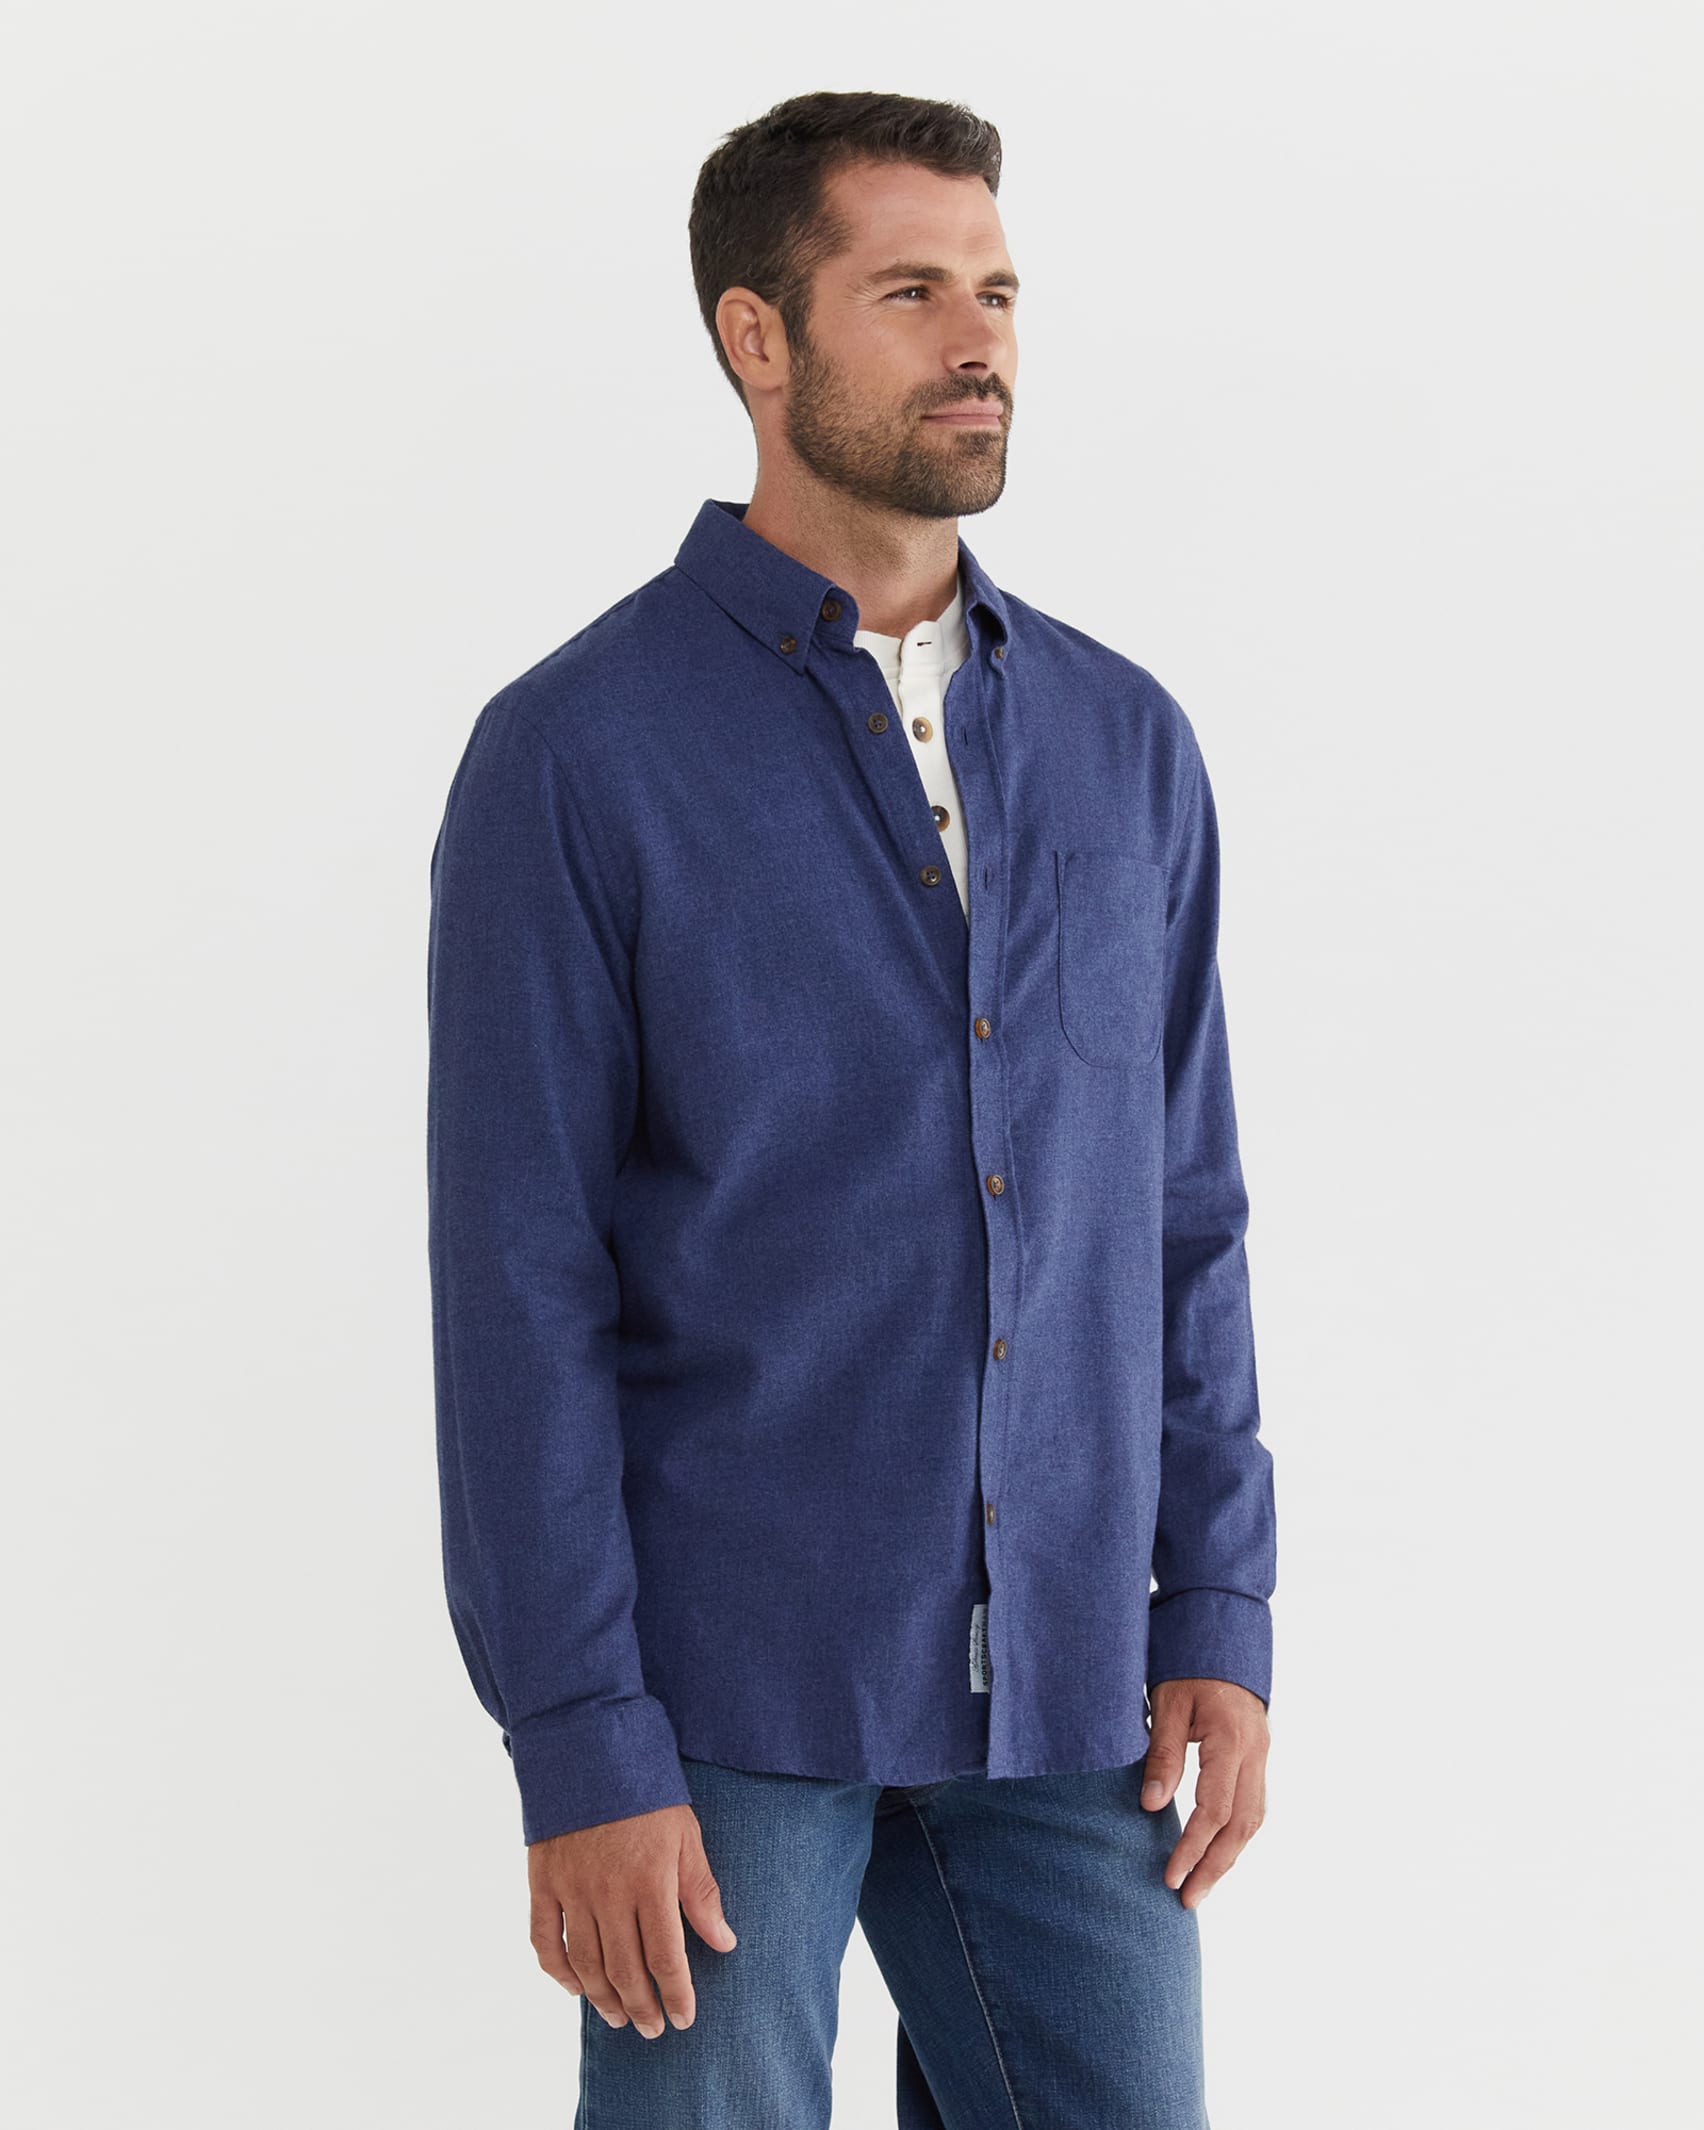 Mclure Long Sleeve Shirt in NAVY